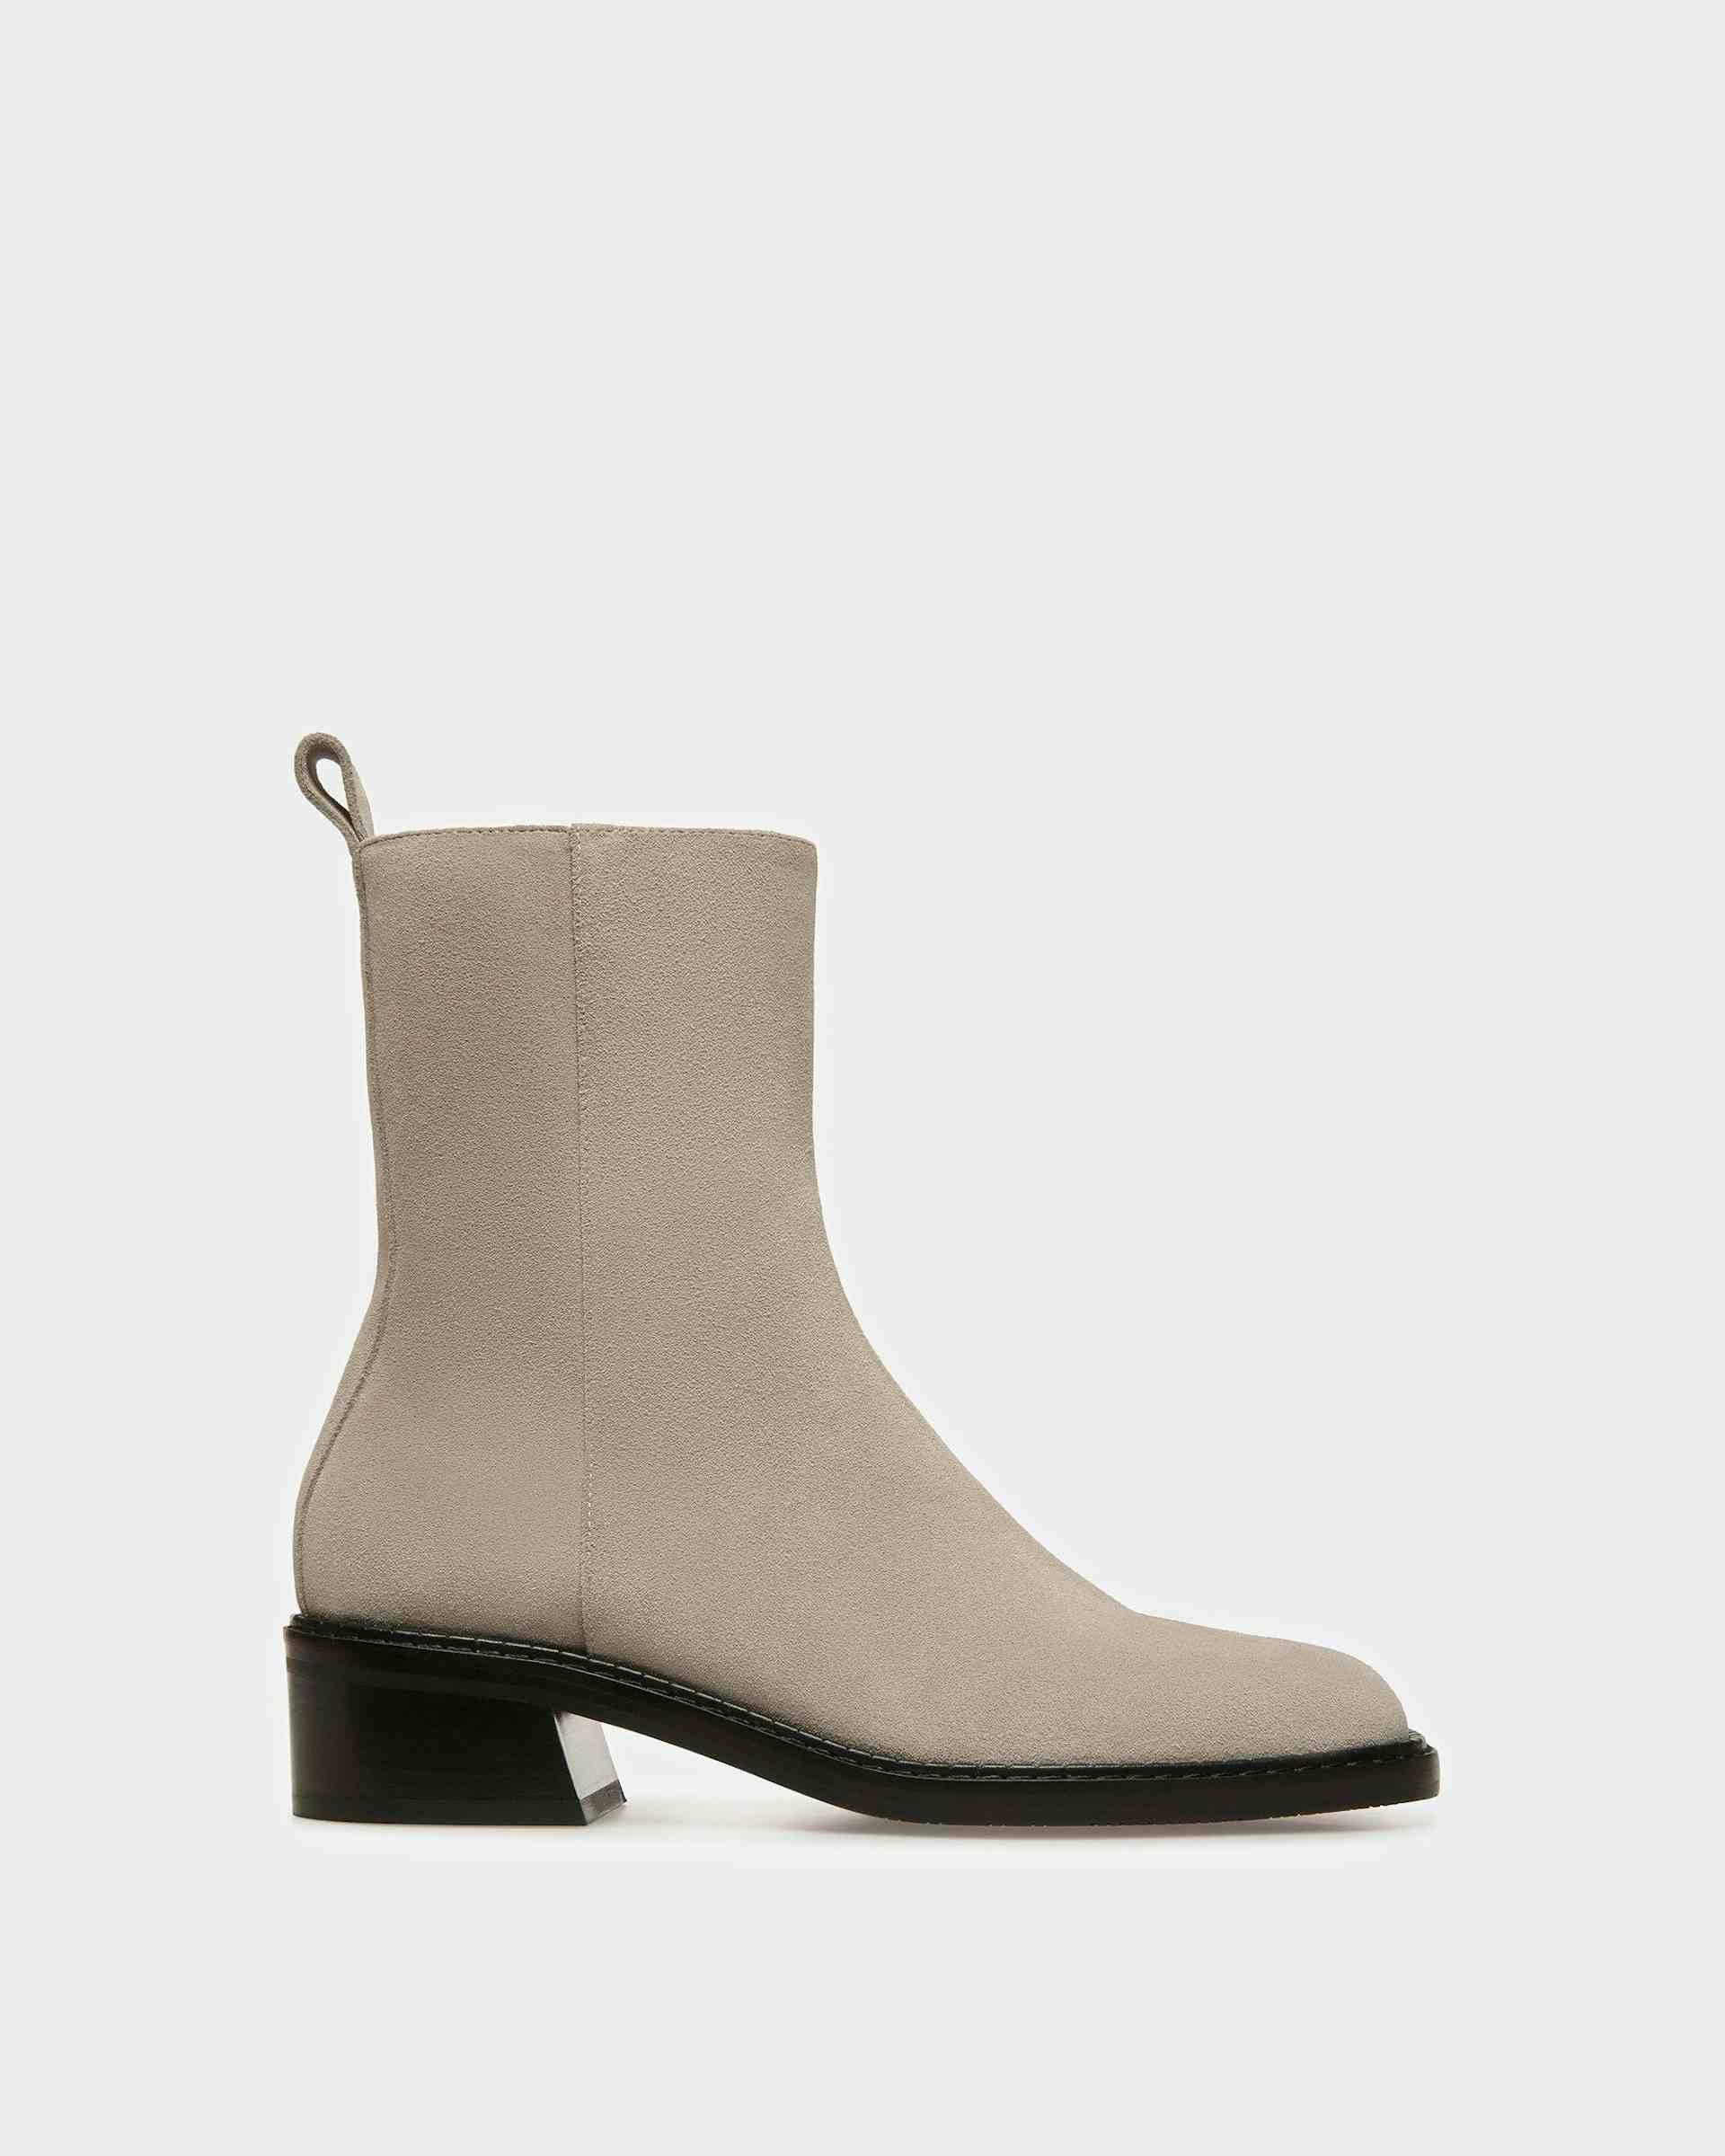 Austine Leather Boots In Stone - Women's - Bally